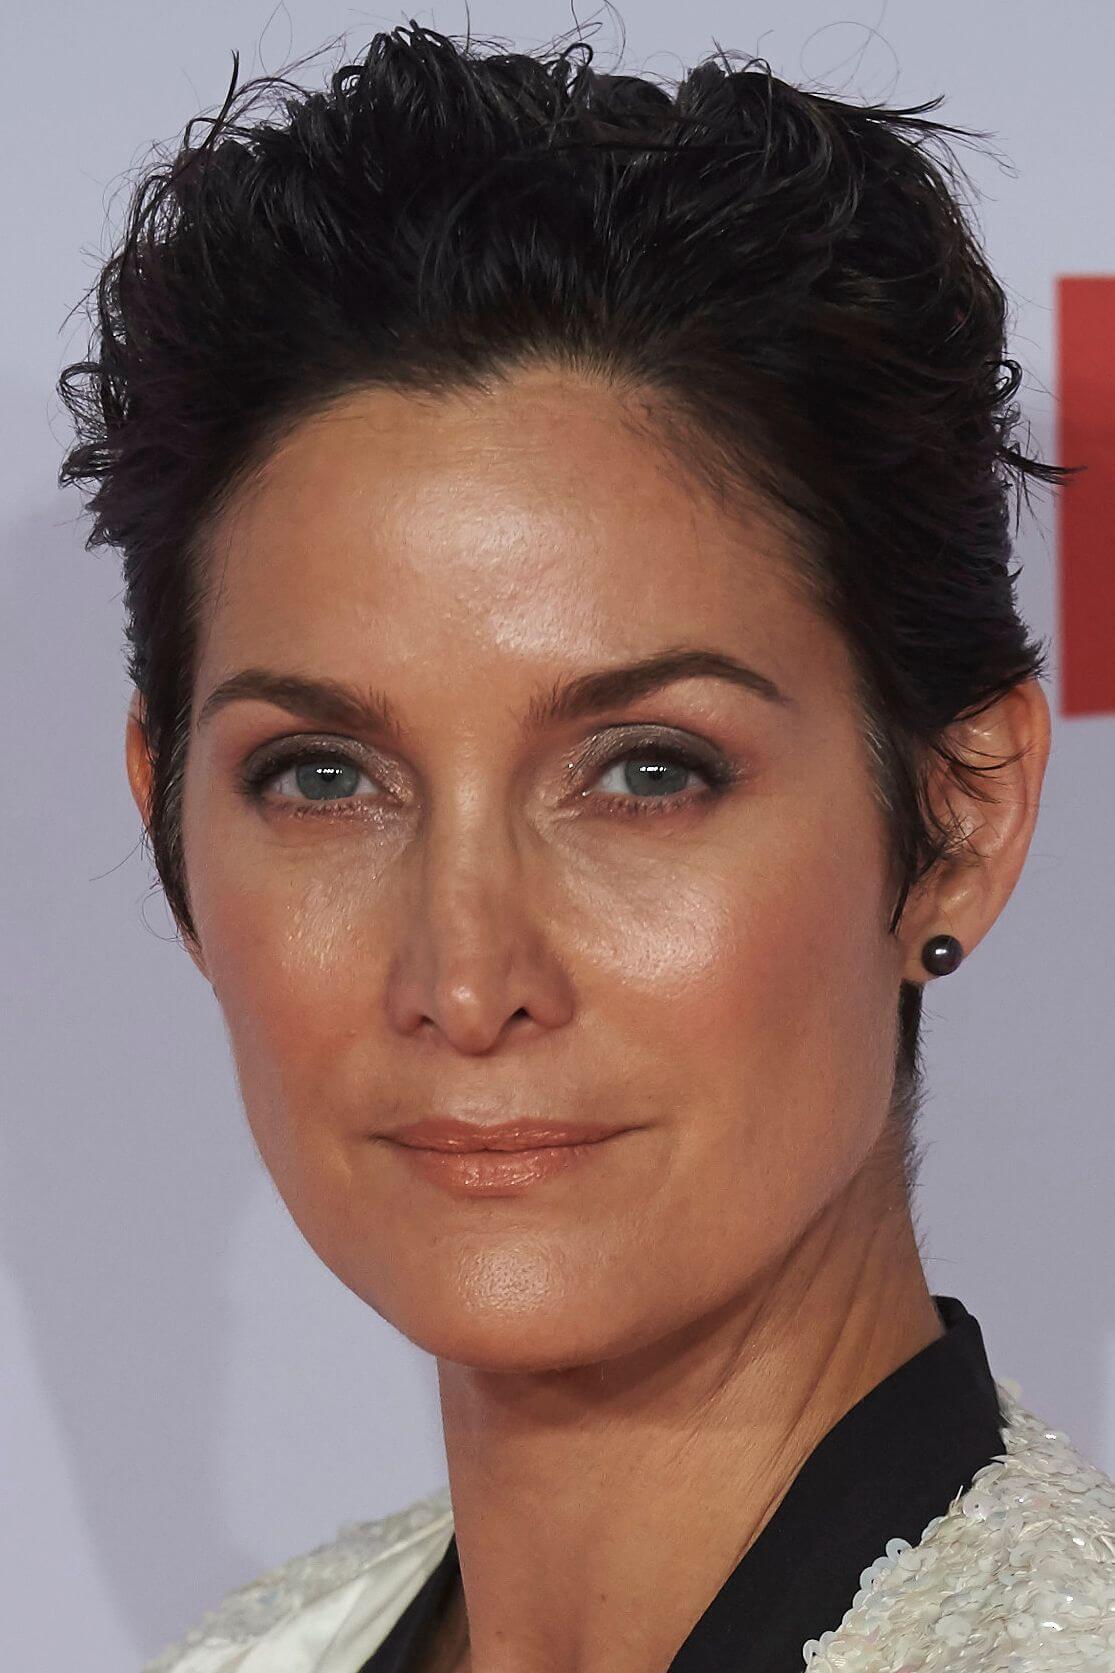 60+ Hottest Carrie-Anne Moss Boobs Pictures Will Make You Fall In Love Like Crazy 243